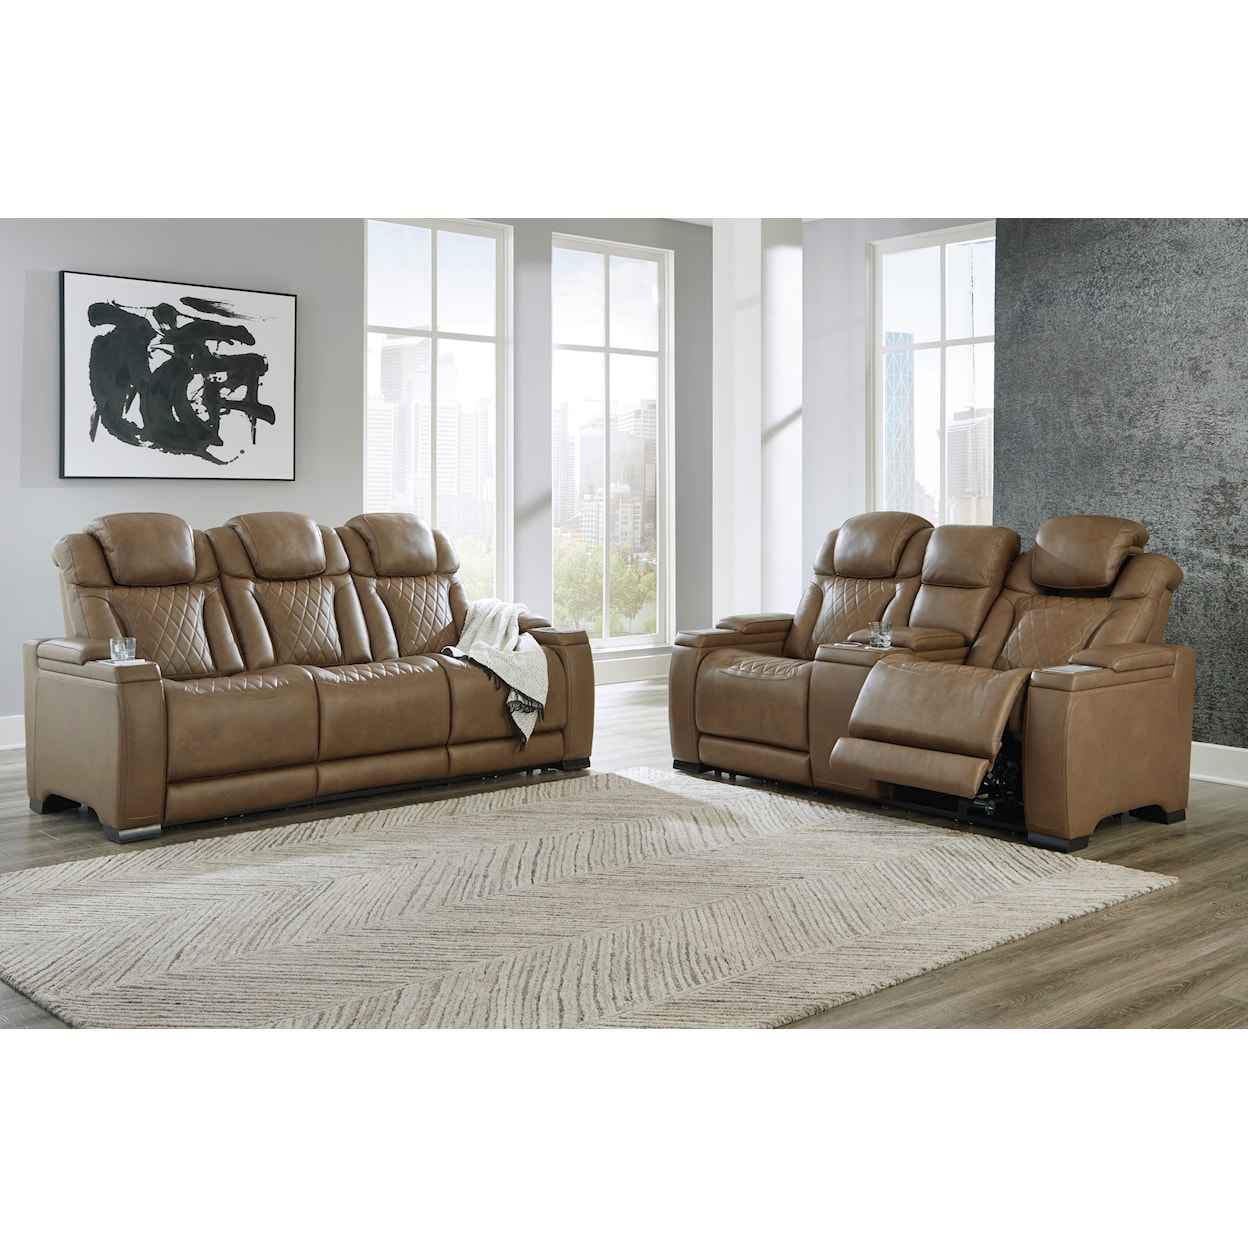 Signature Design by Ashley Strikefirst Power Reclining Living Room Set